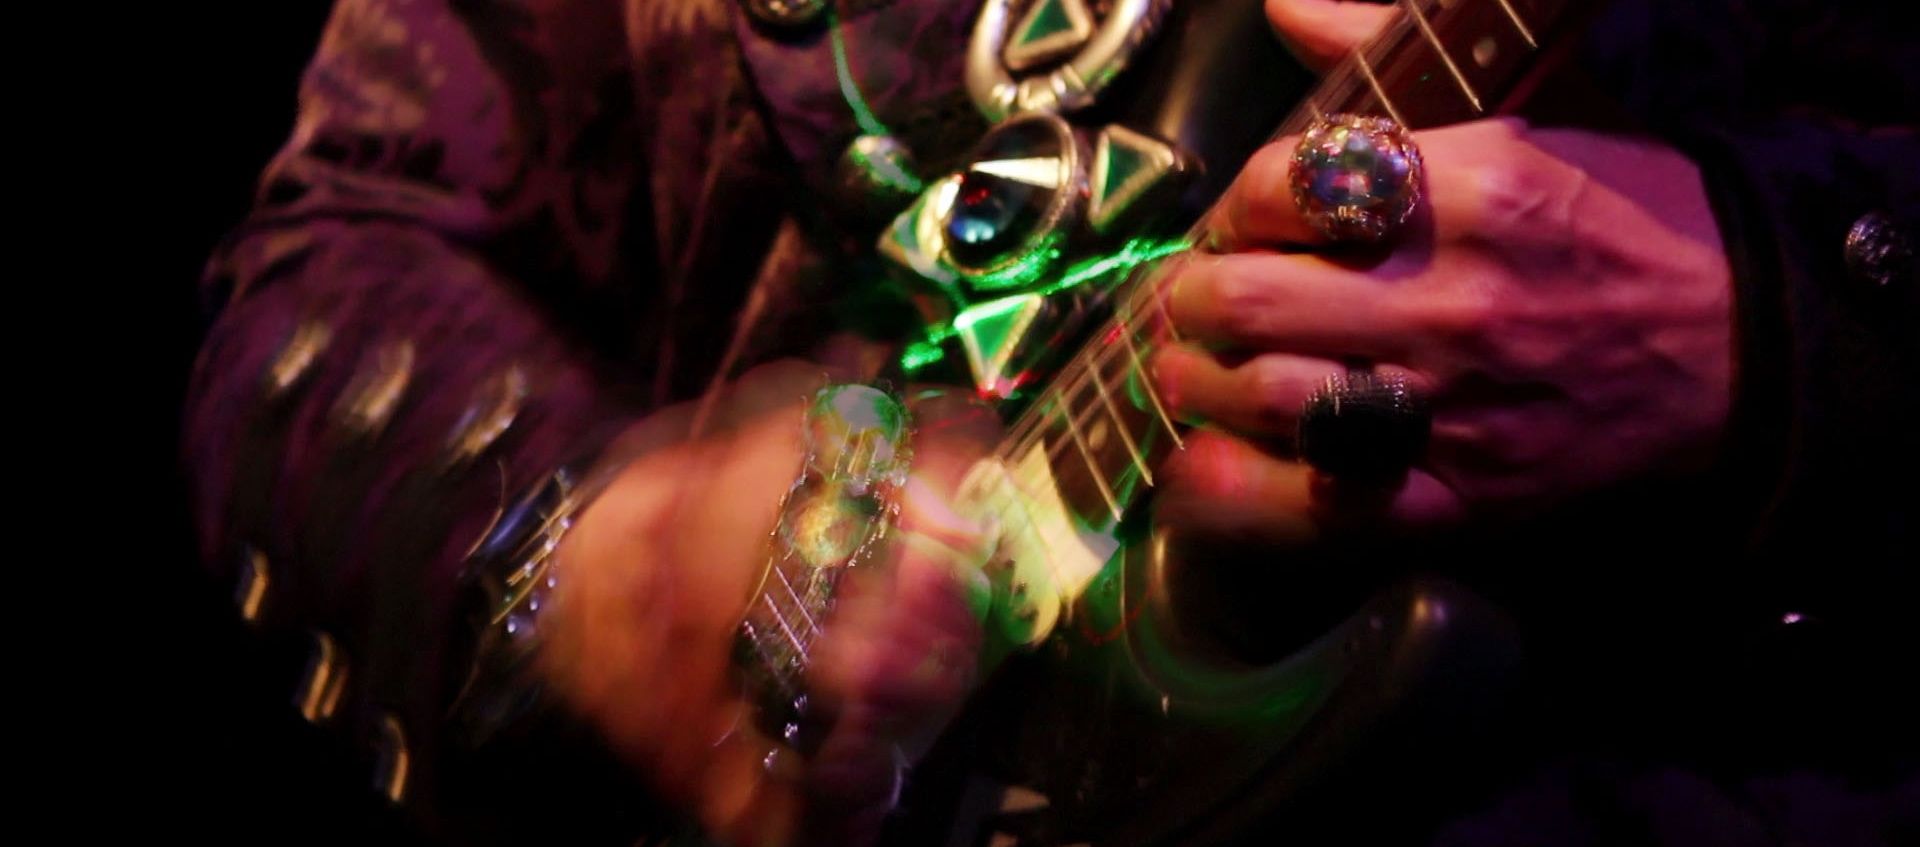 Image of hands playing an electric guitar from the Lori Felker Film Future Language: The Dimensions of VON LMO